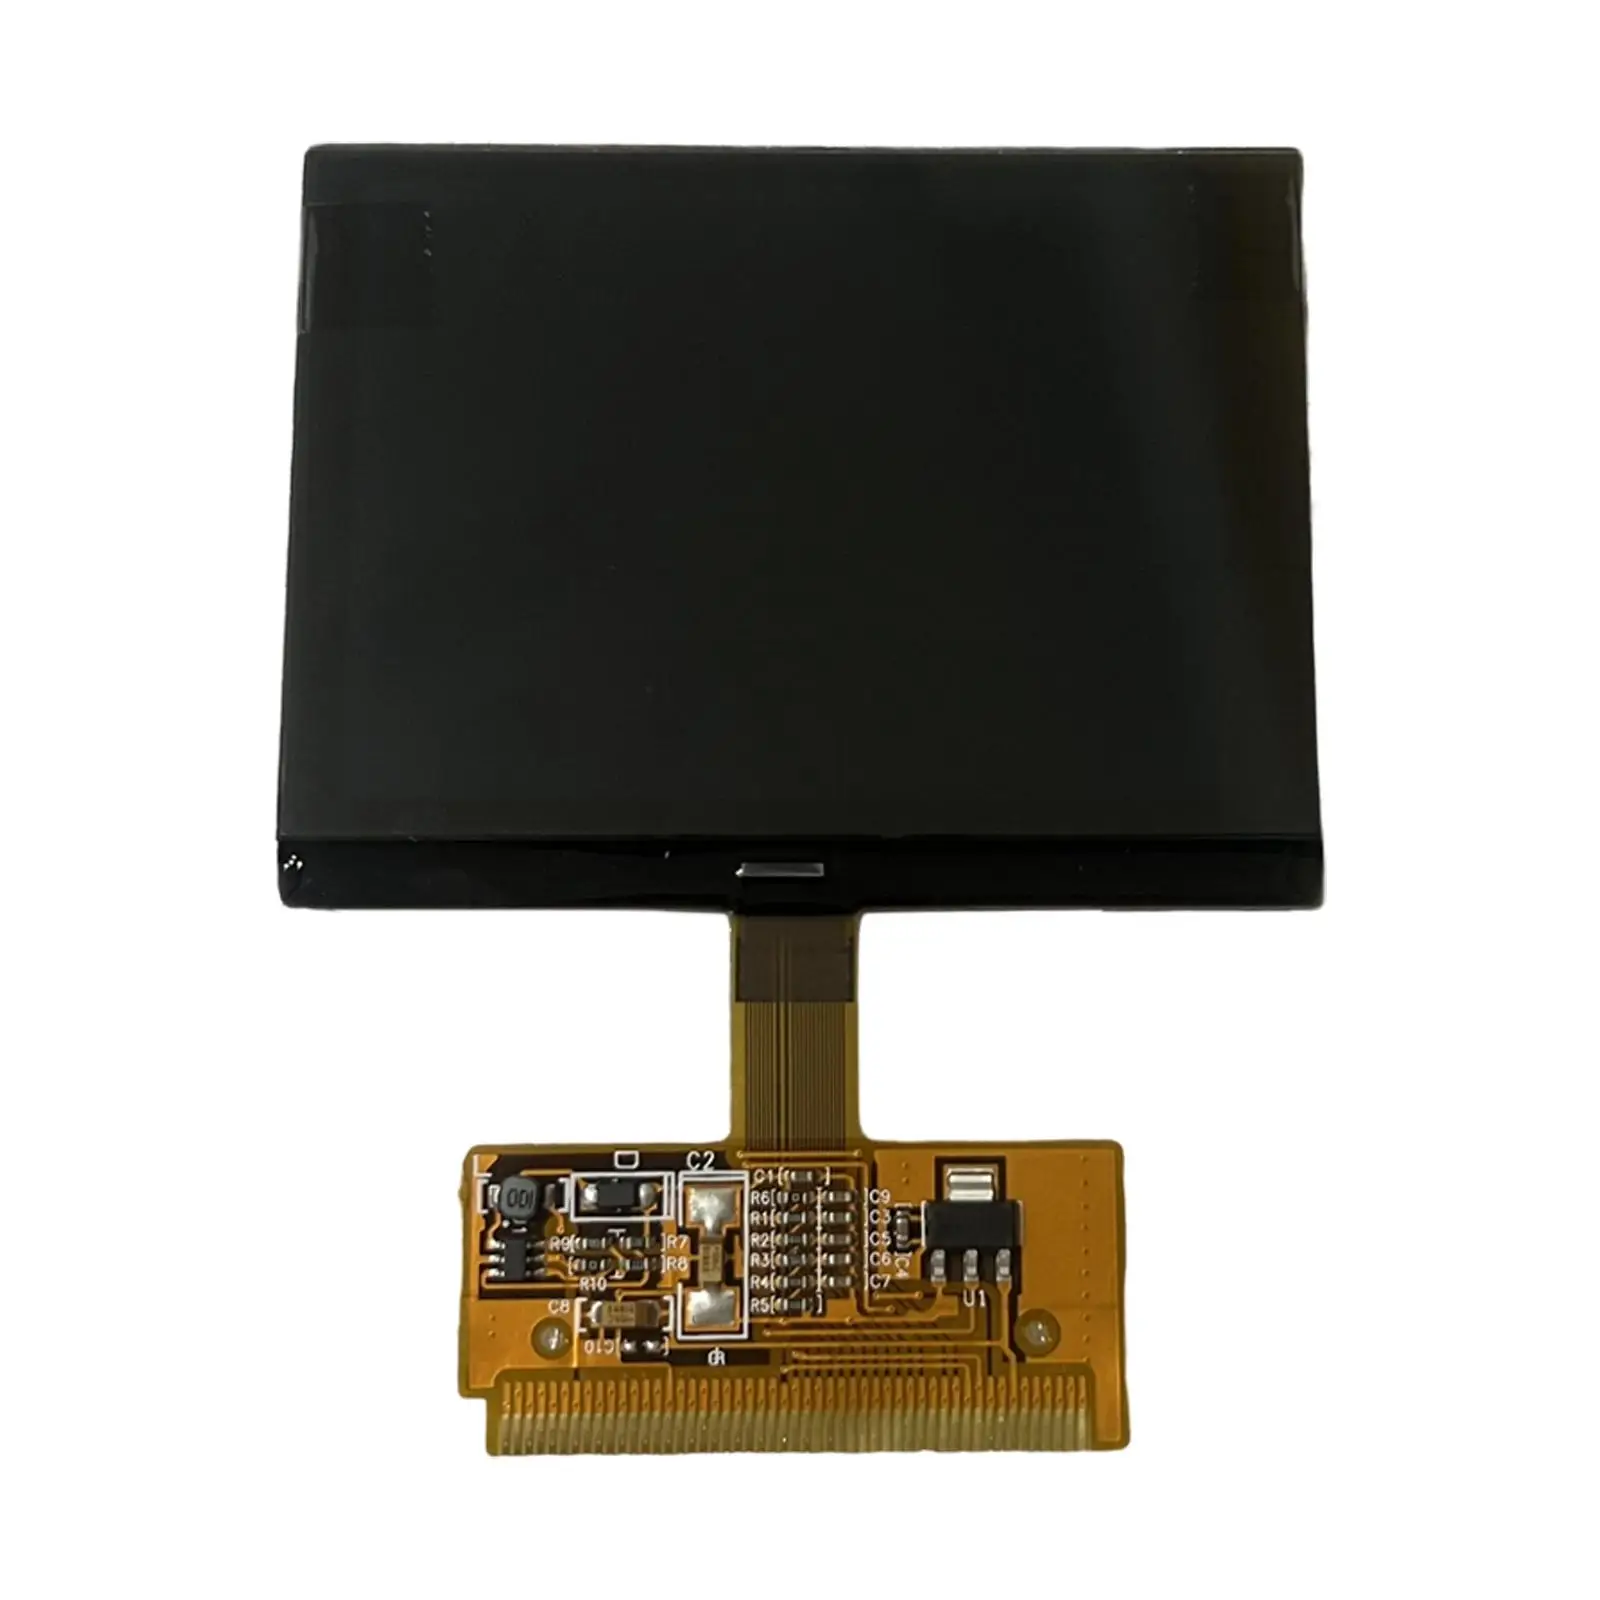 LCD Display Replacement Professional Vehicle Repair Parts Durable for Audi A3 A4 A6 S4 B5 Vdo 3inchx2.24inch Easily Install